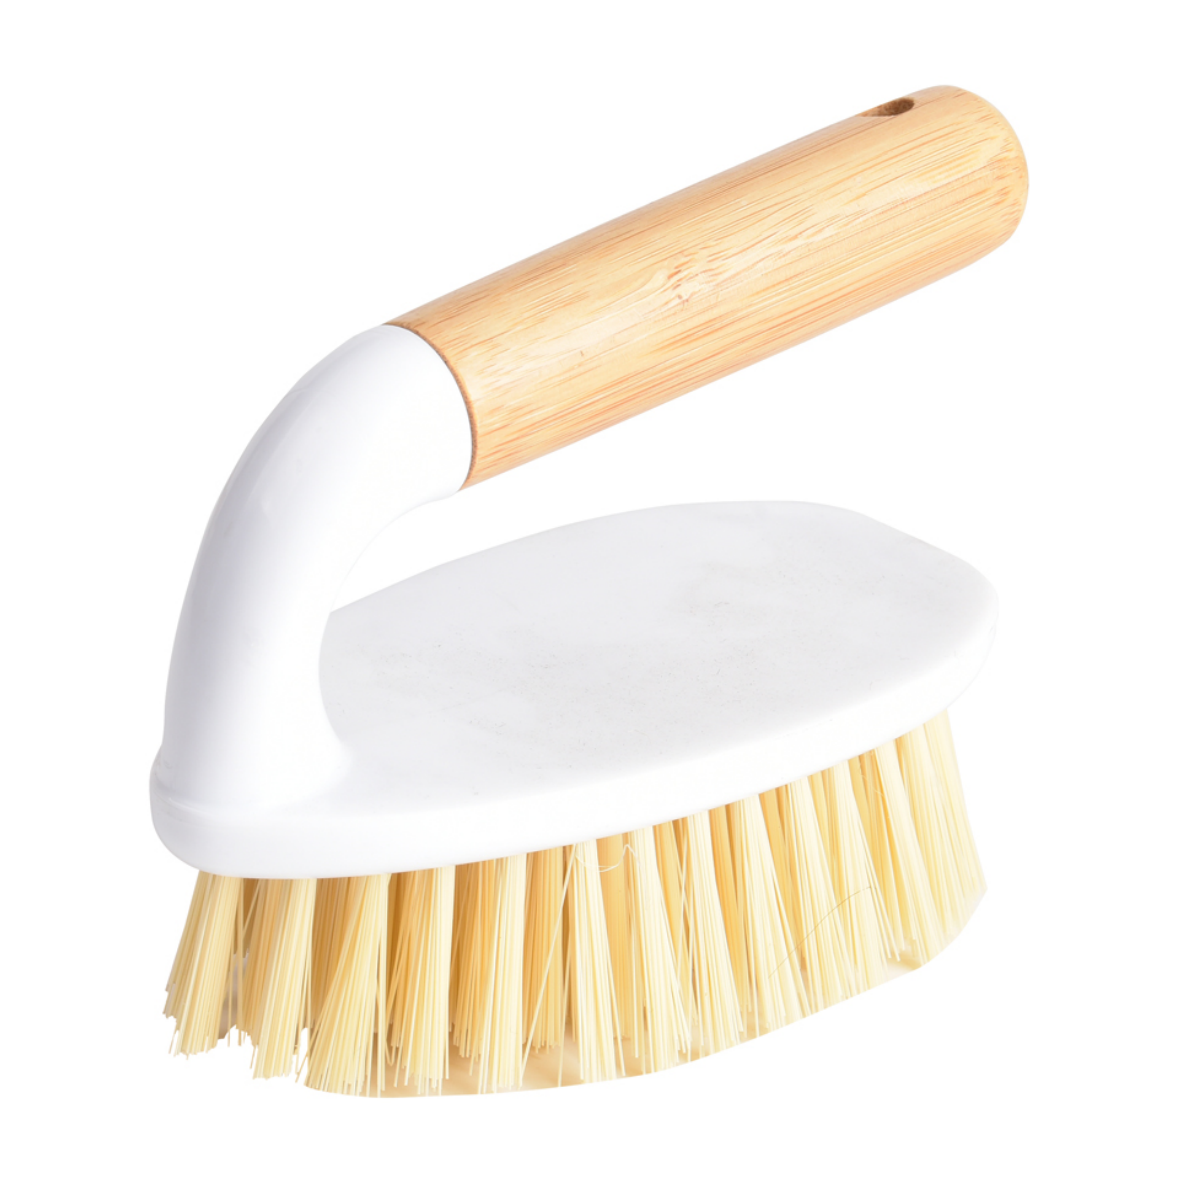 Scrub Brush for Cleaning with Bamboo Handle